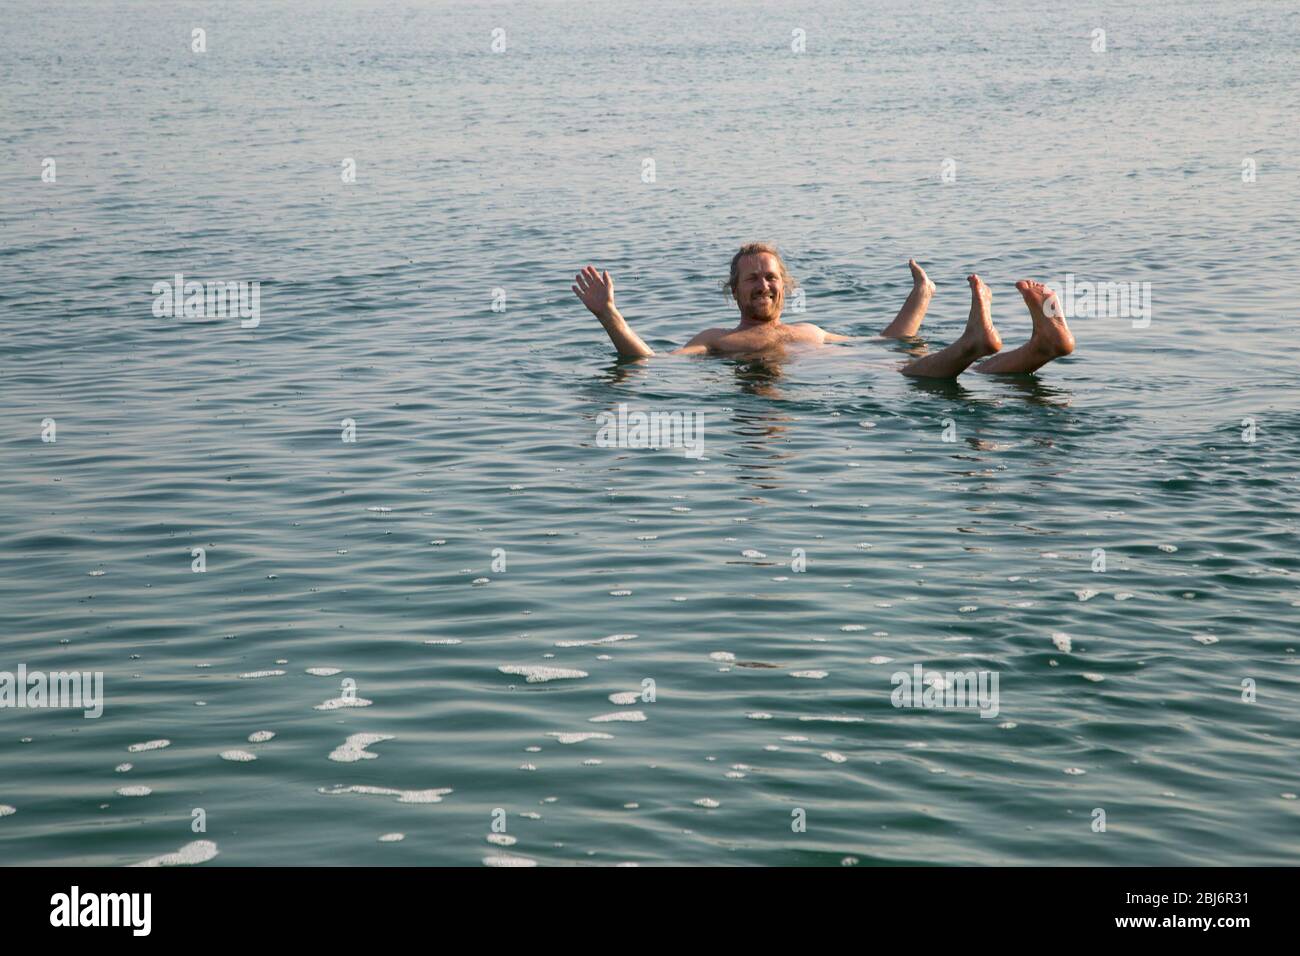 Happy smiling man floating on his back in the Dead Sea Stock Photo